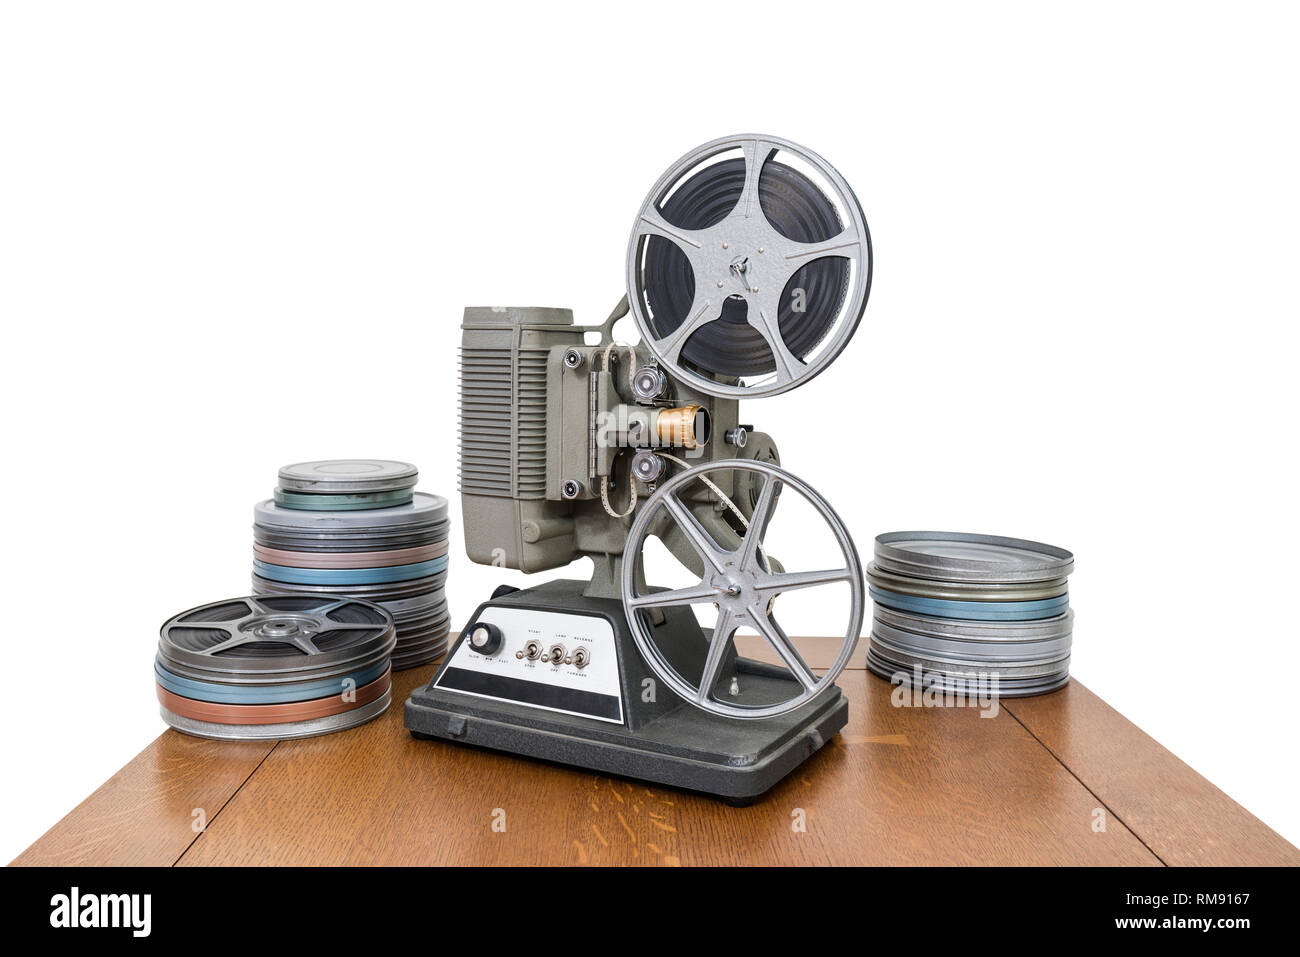 Vintage 8mm Home Movie Projector Isolated On White Stock, 55% OFF